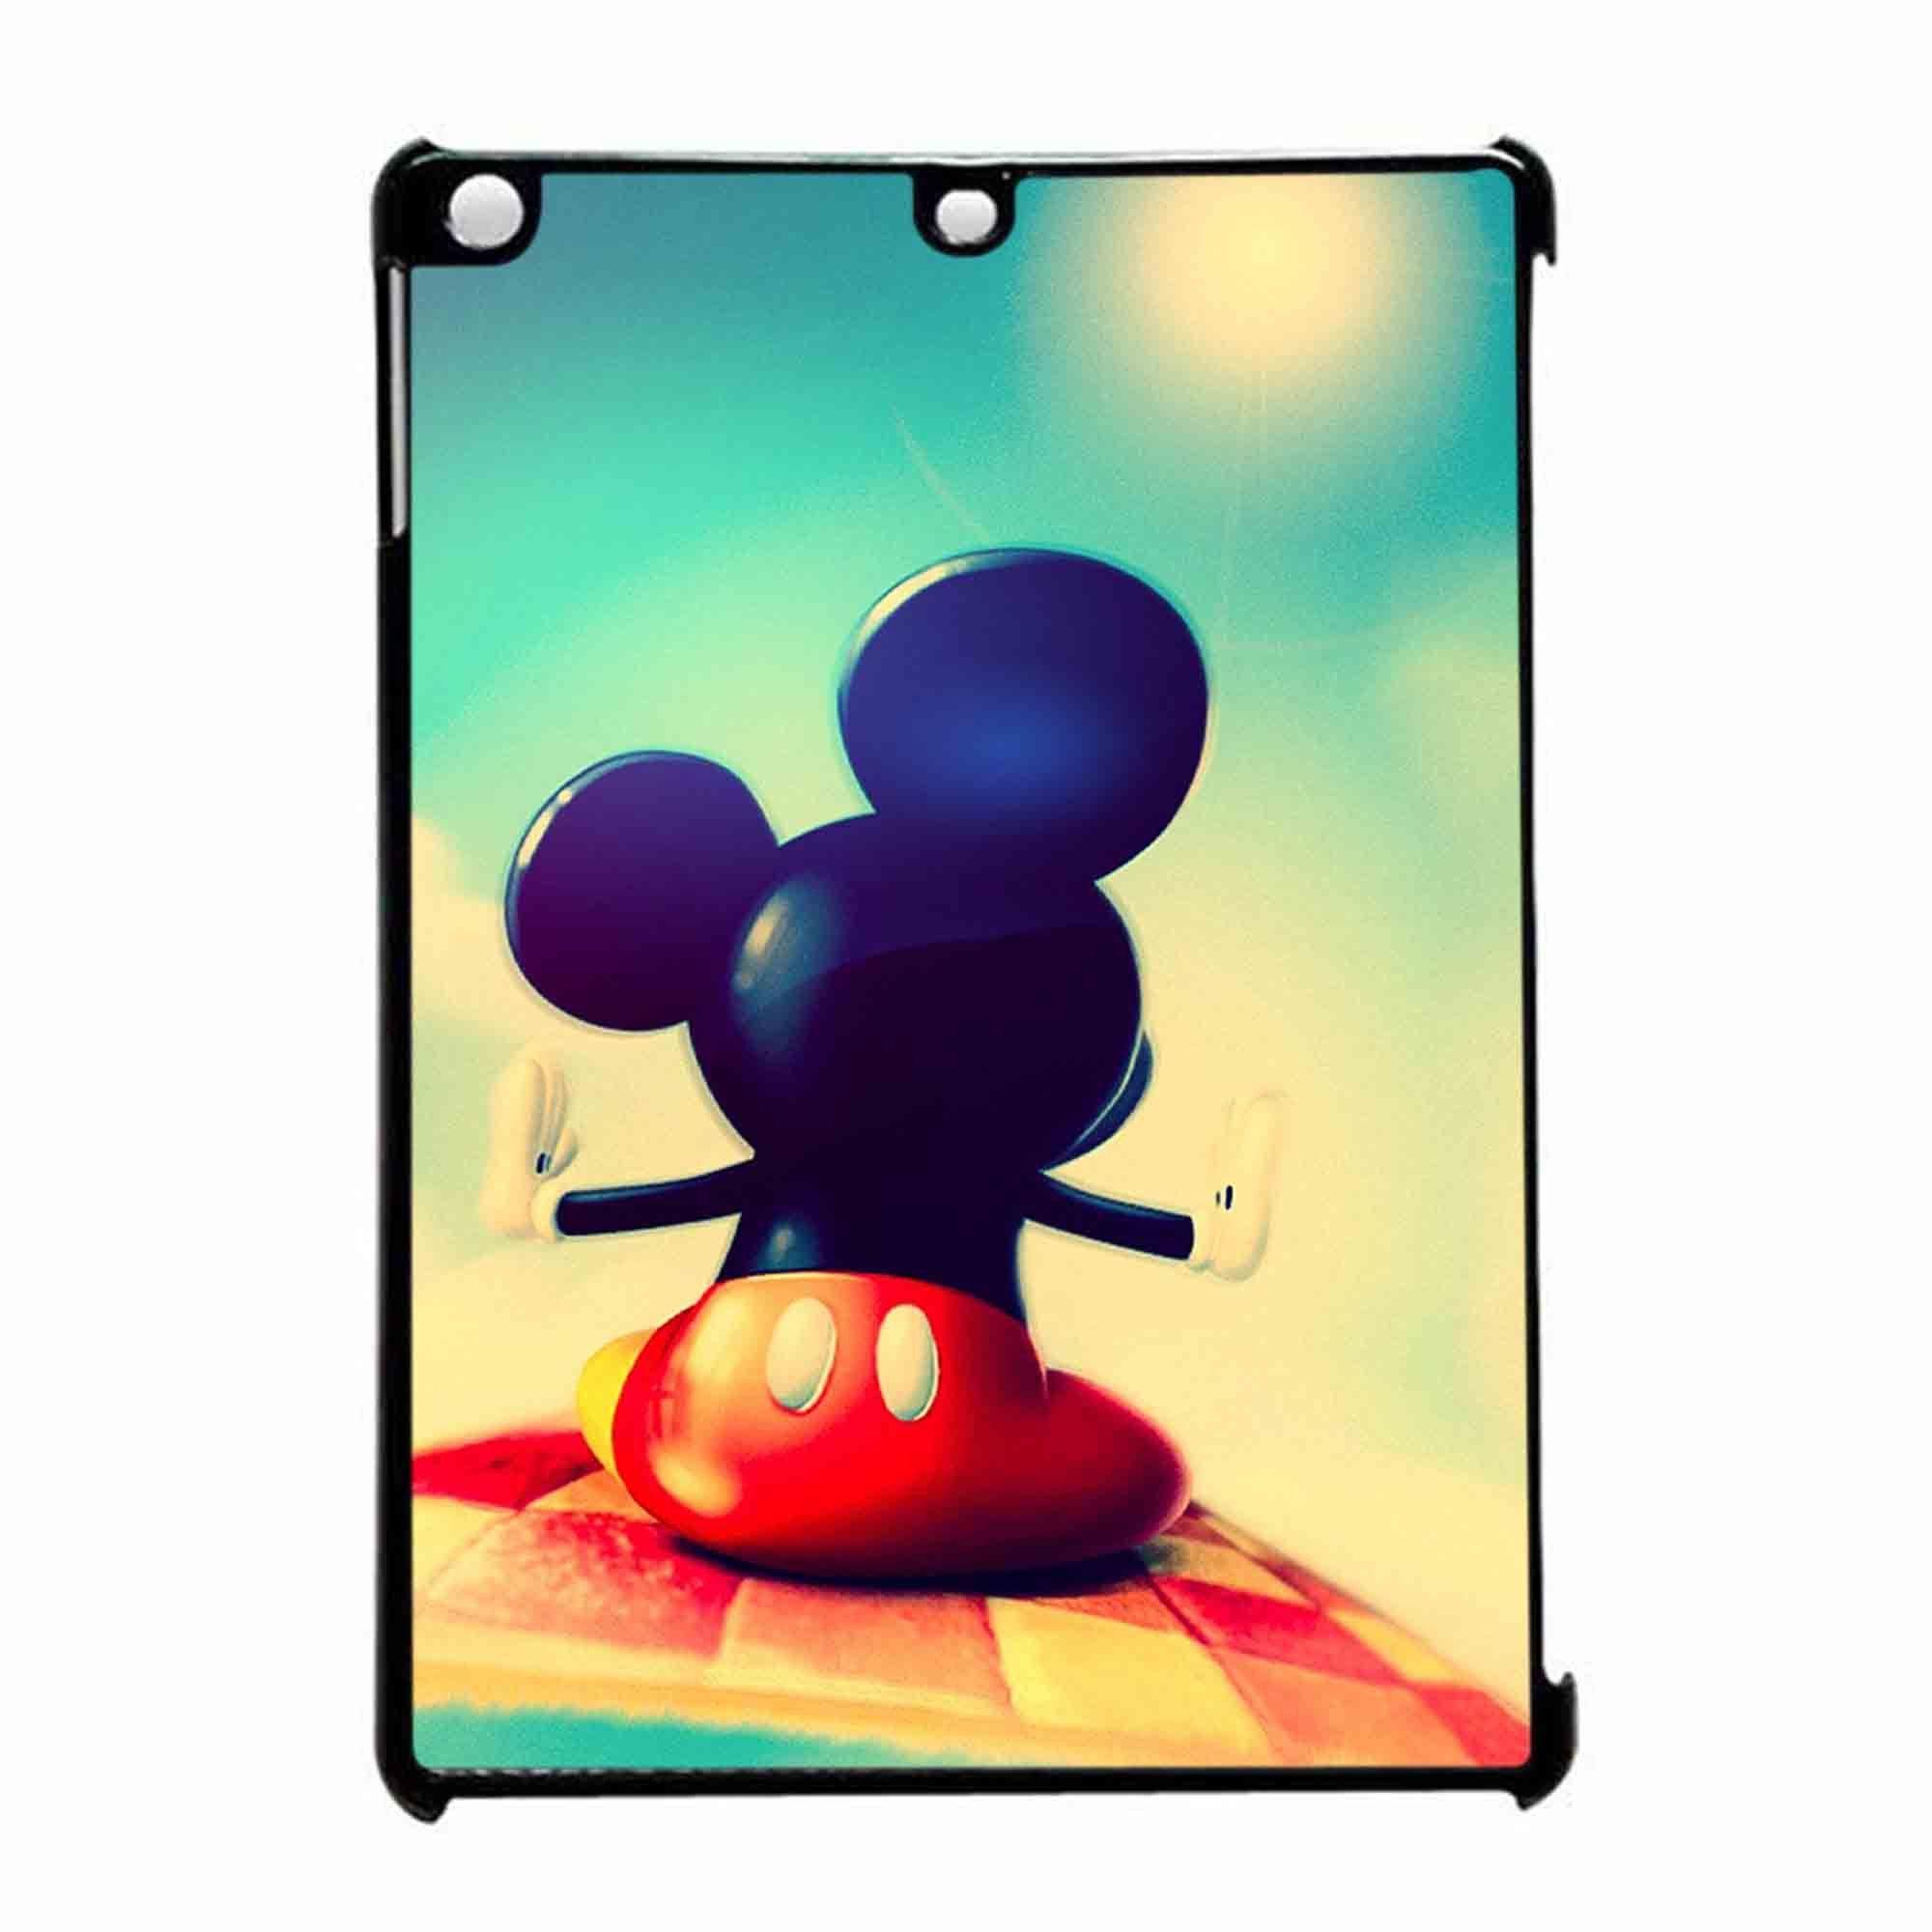 2000 x 2000 · jpeg - Mickey Mouse Dream iPad Air Case | Mickey mouse, Cute wallpapers, Mickey